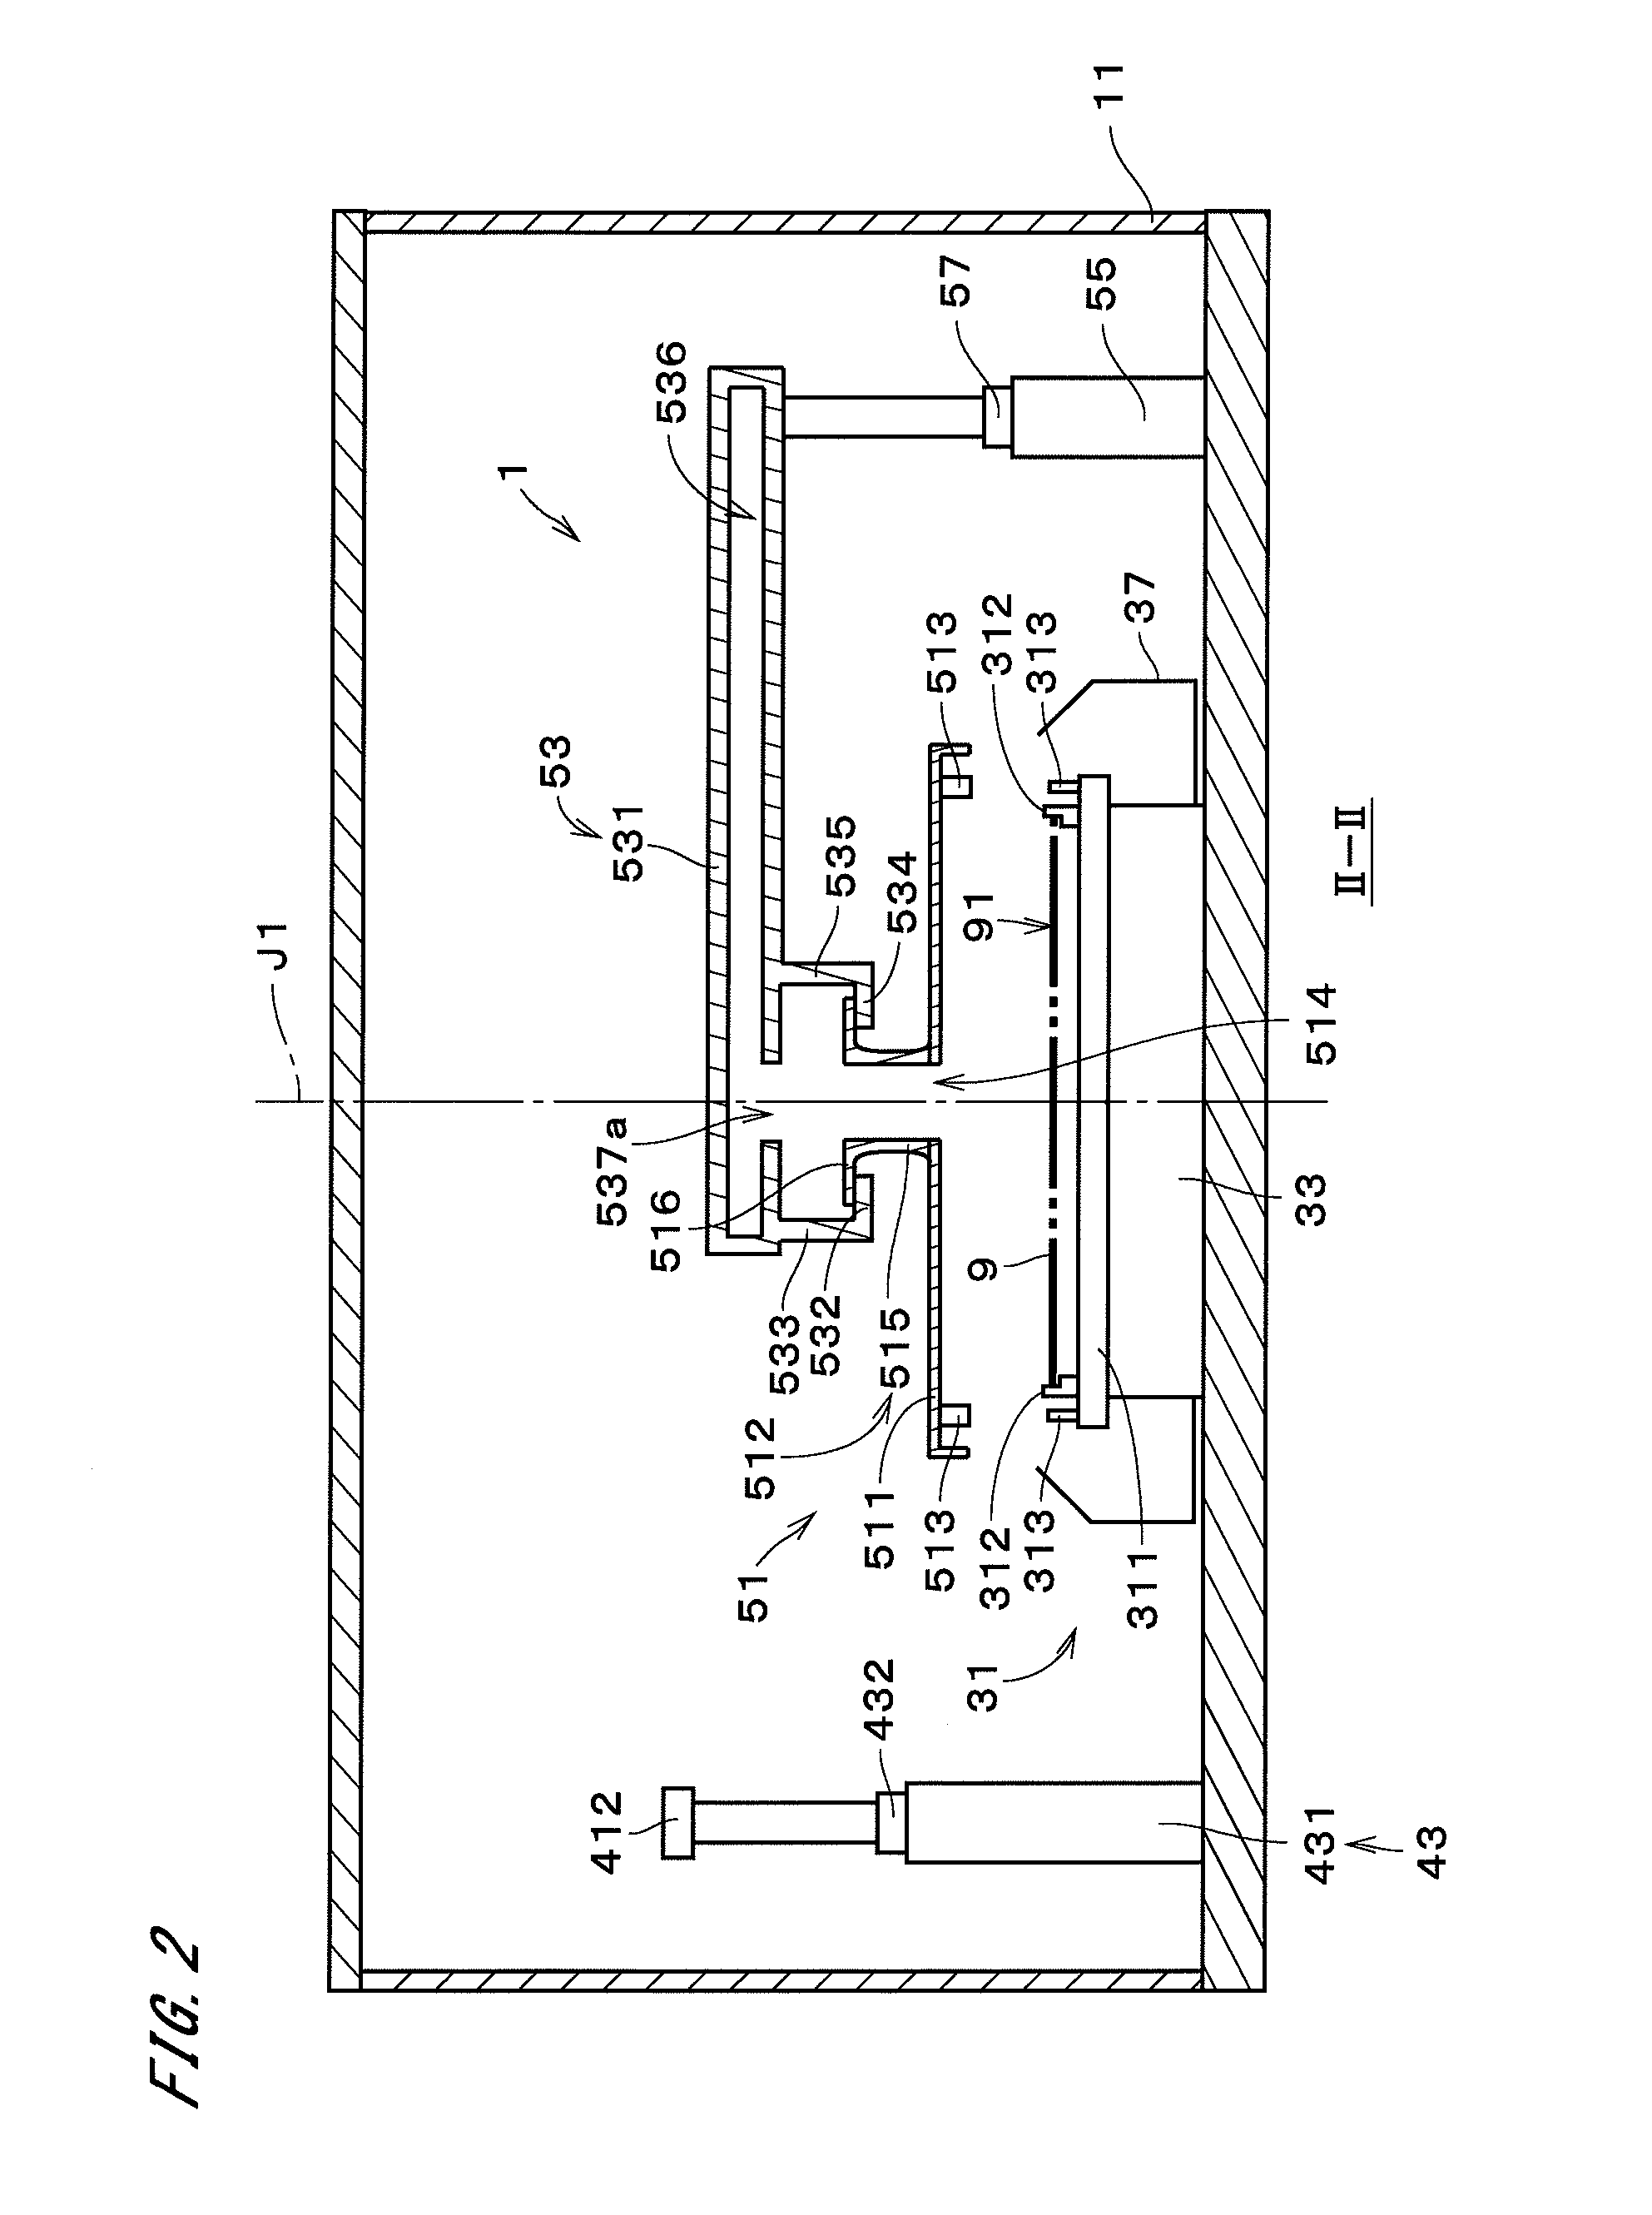 Substrate processing apparatus, substrate processing system, and substrate processing method